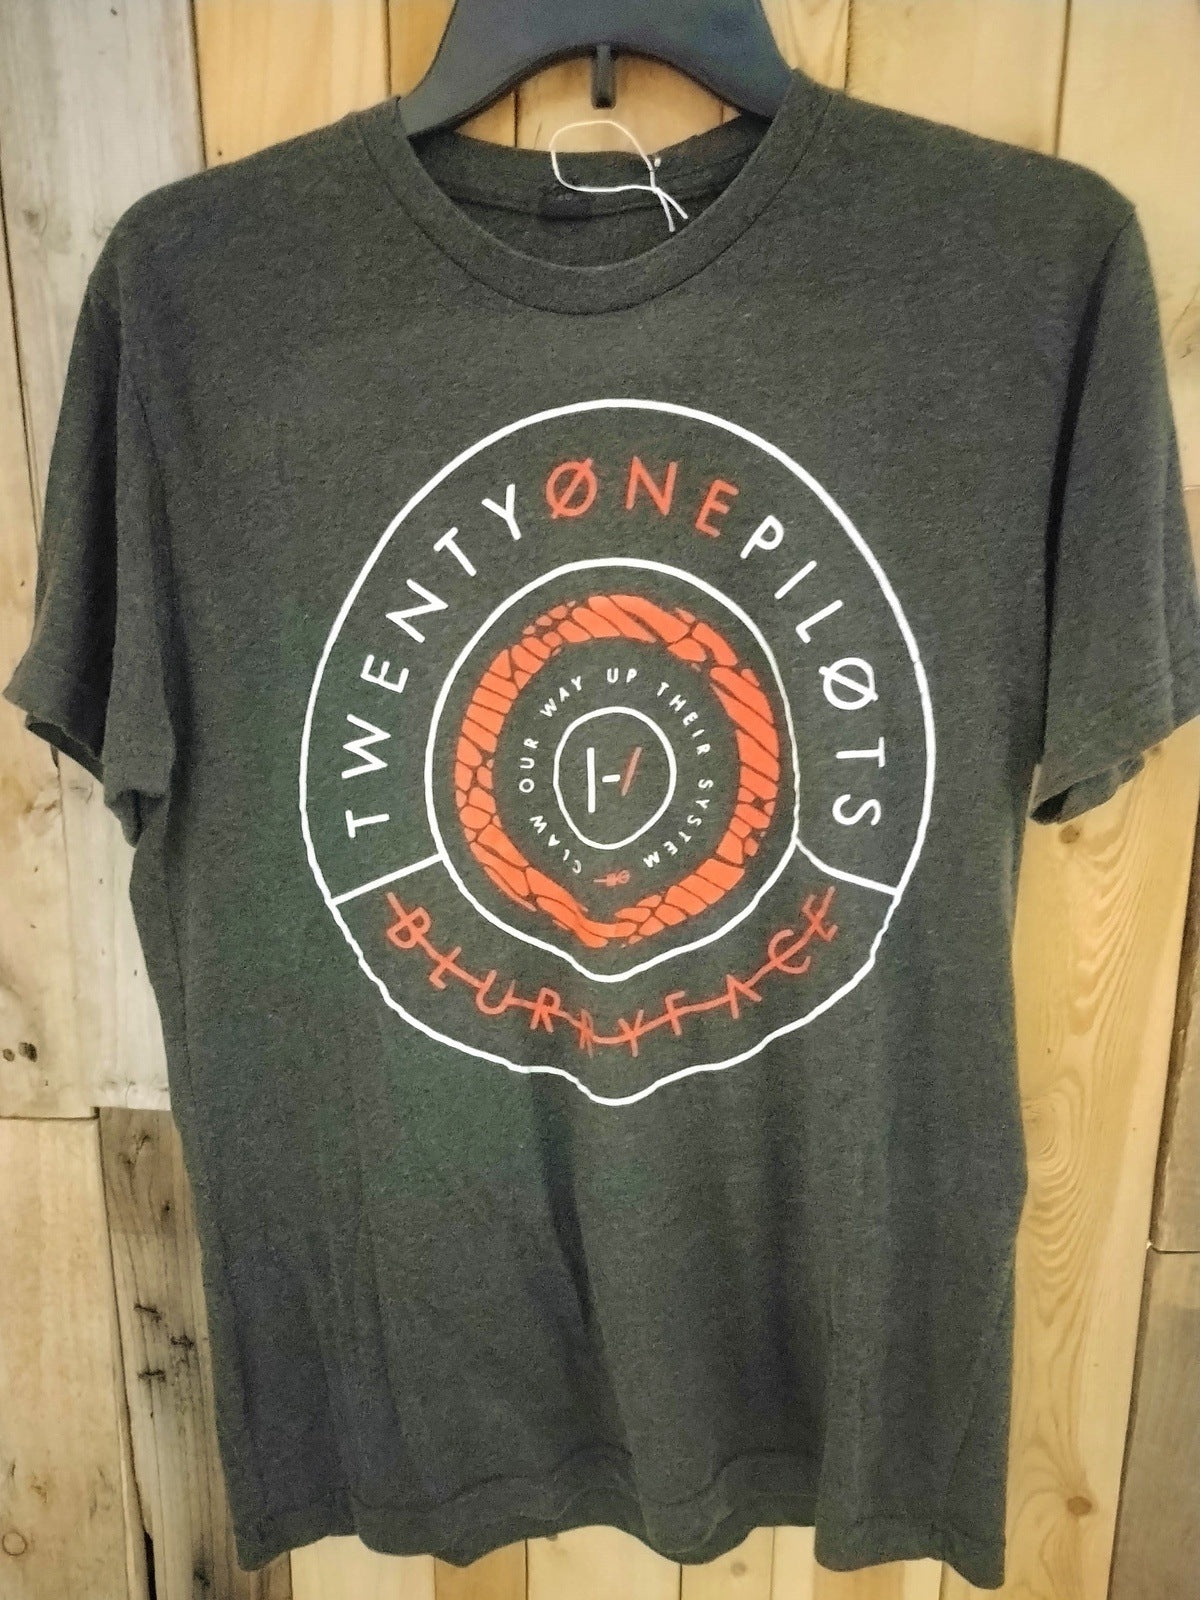 Twenty One Pilots "Claw Our Way Up Their System" T Shirt Size Medium 623562WH